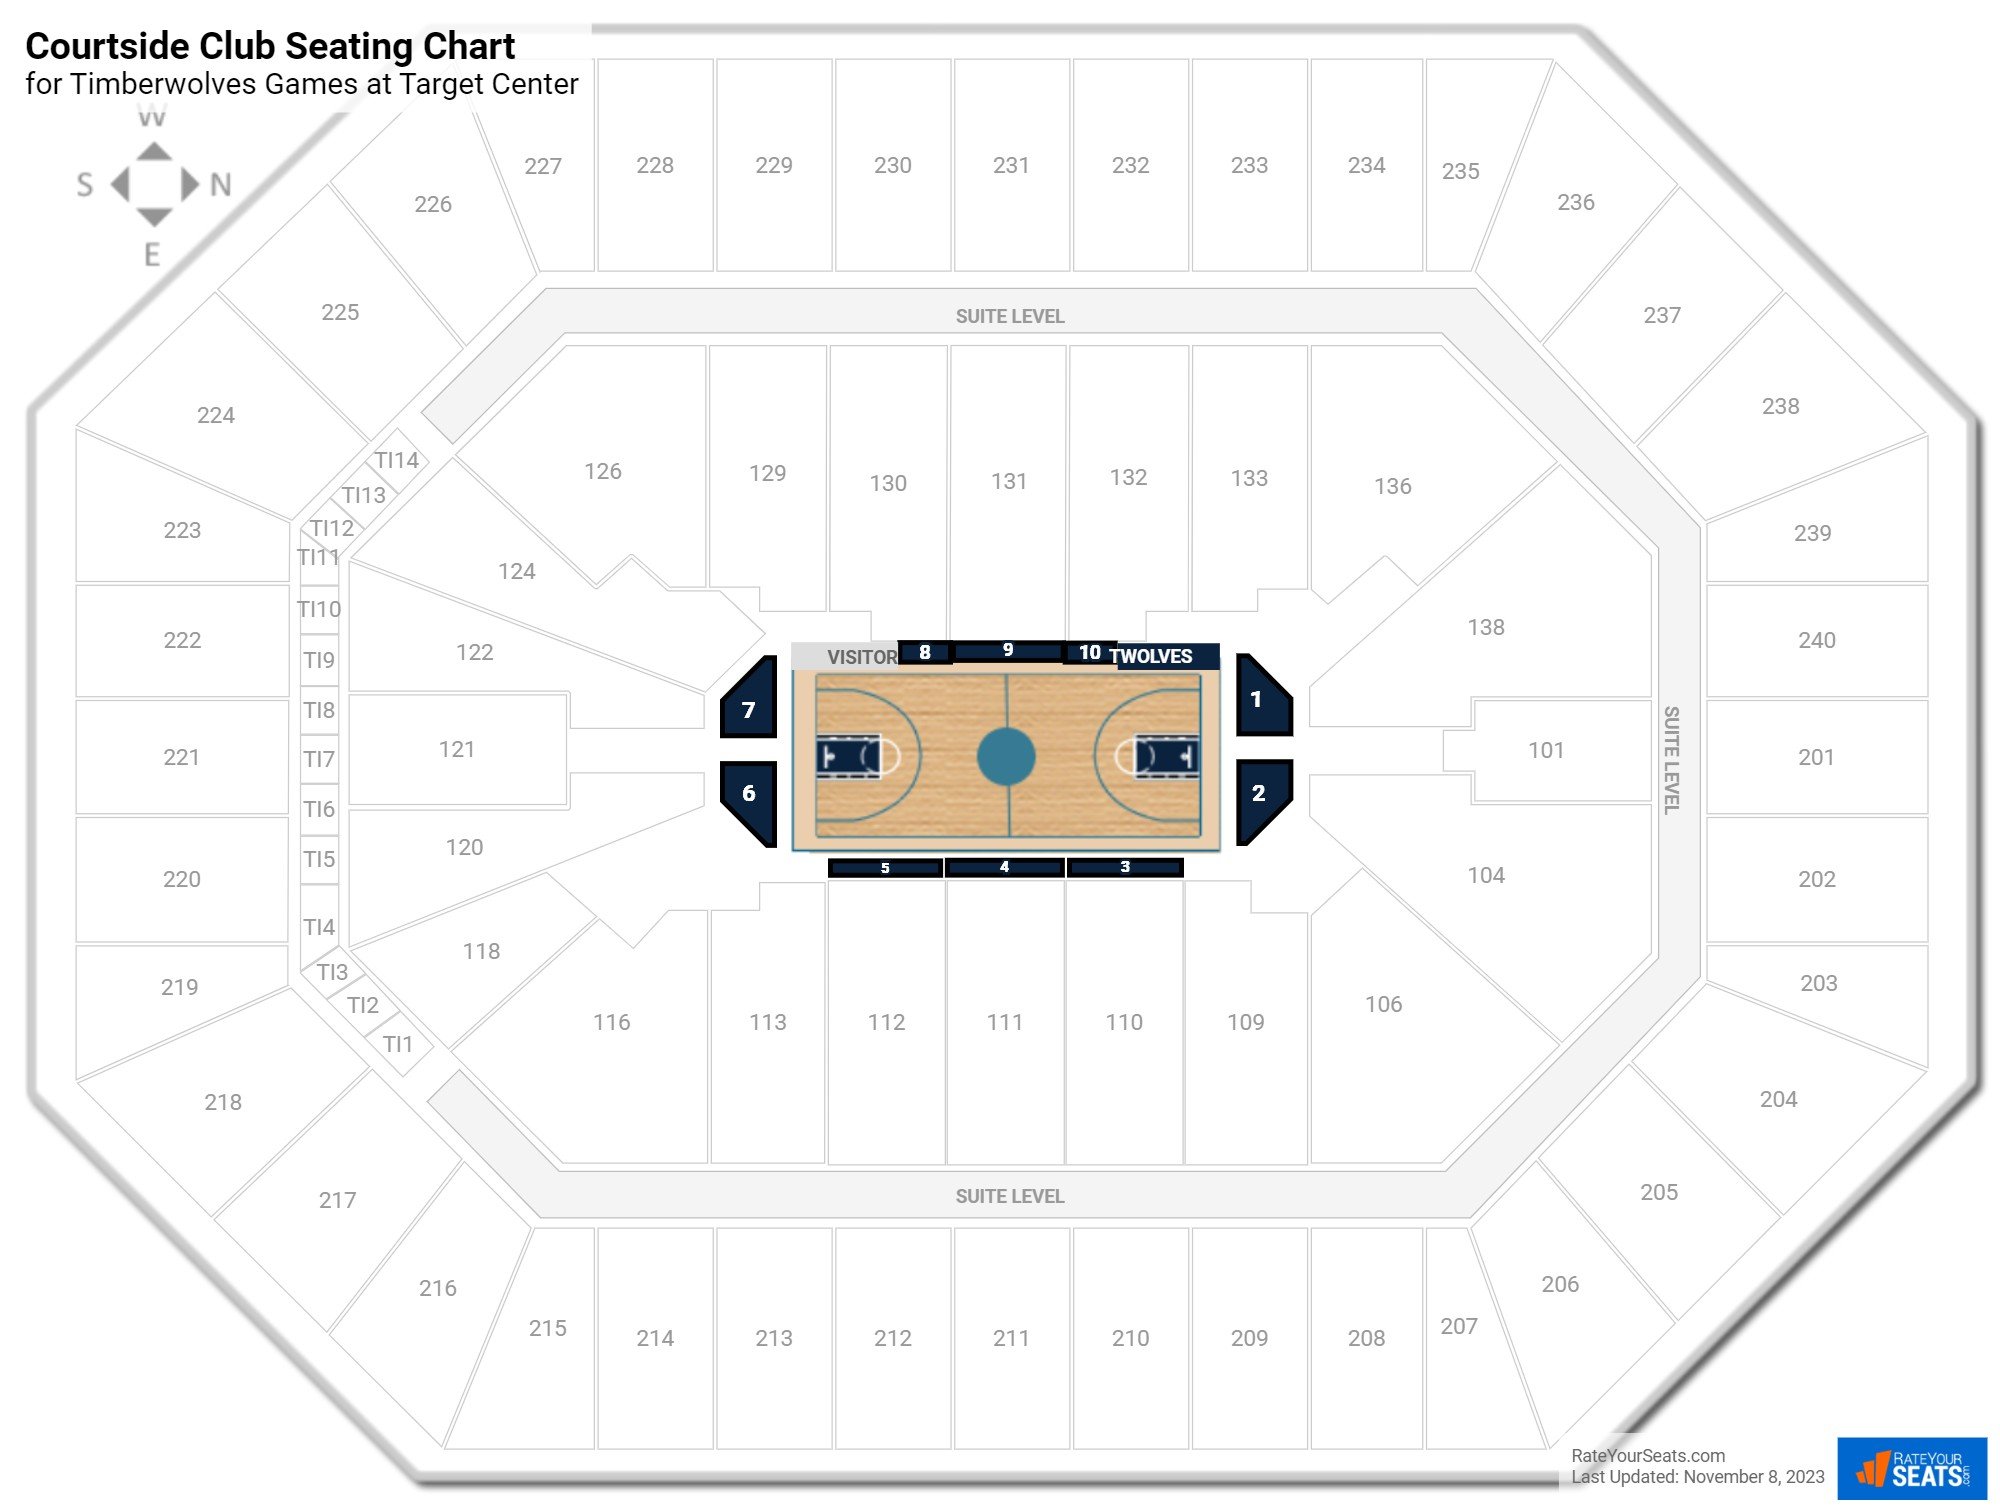 Timberwolves Courtside Club Seating Chart at Target Center